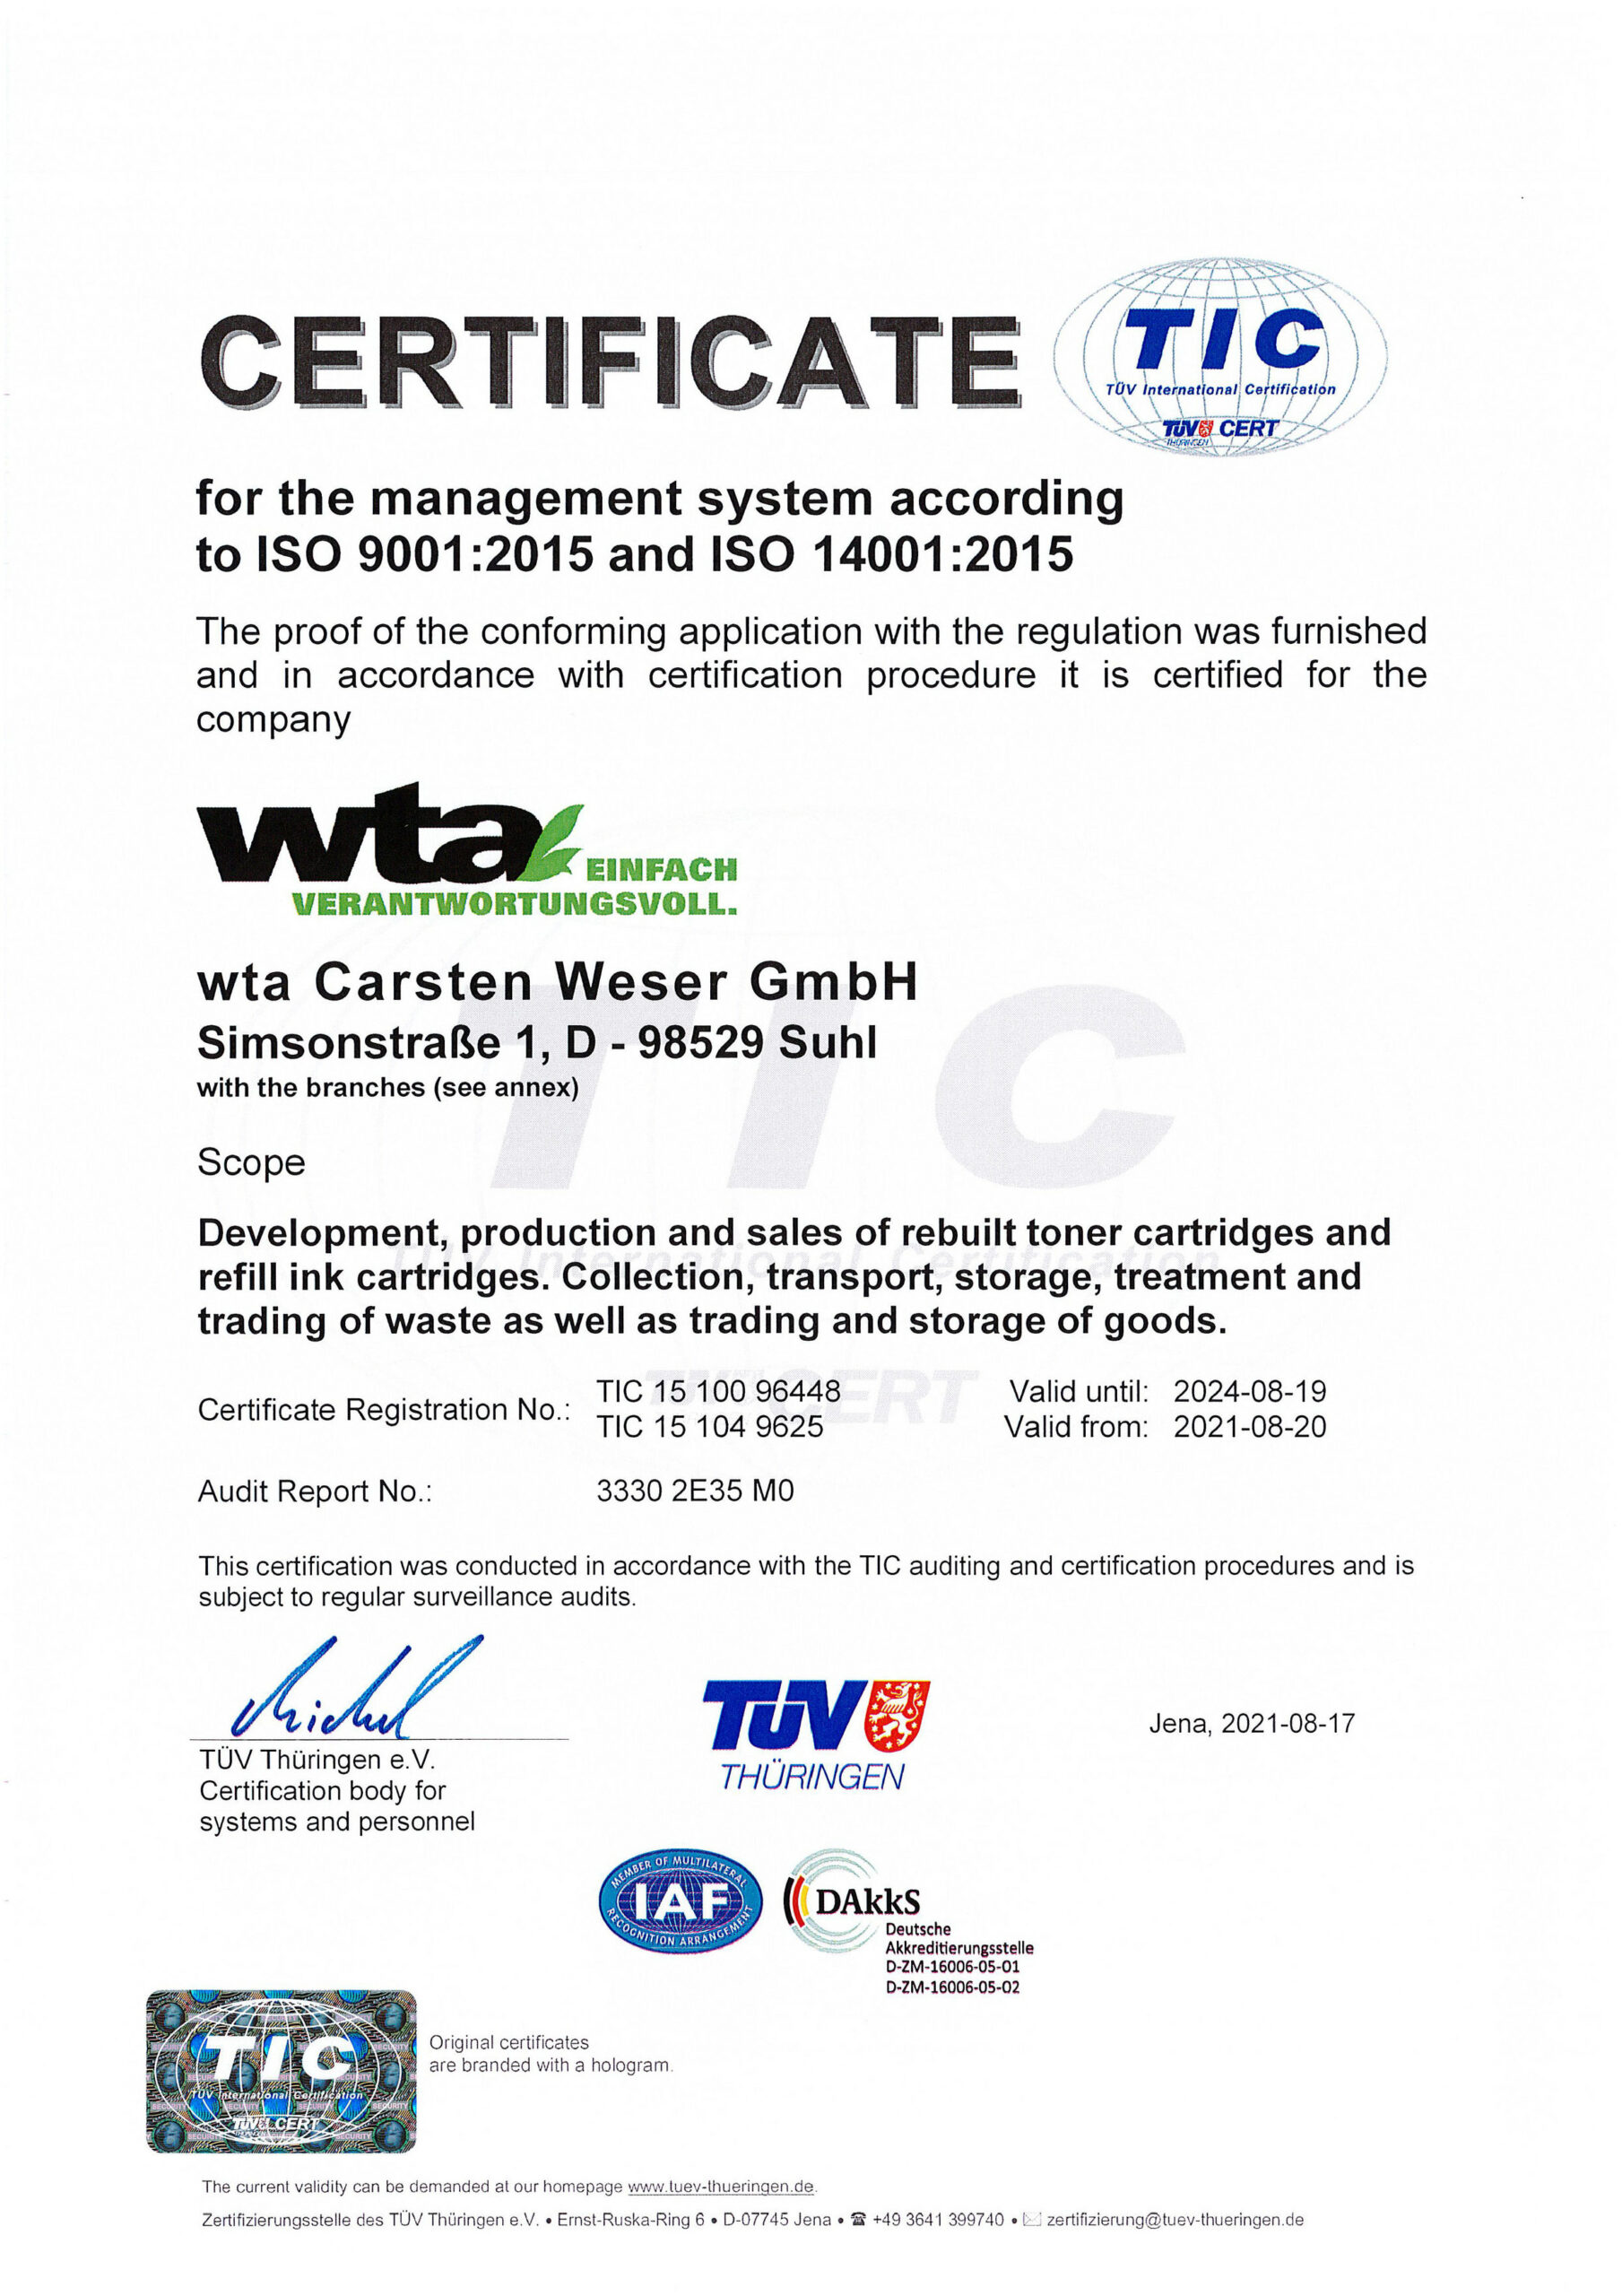 Certificate of the company wta Suhl for the management system according to ISO 9001:2008 and ISO 14001:2004